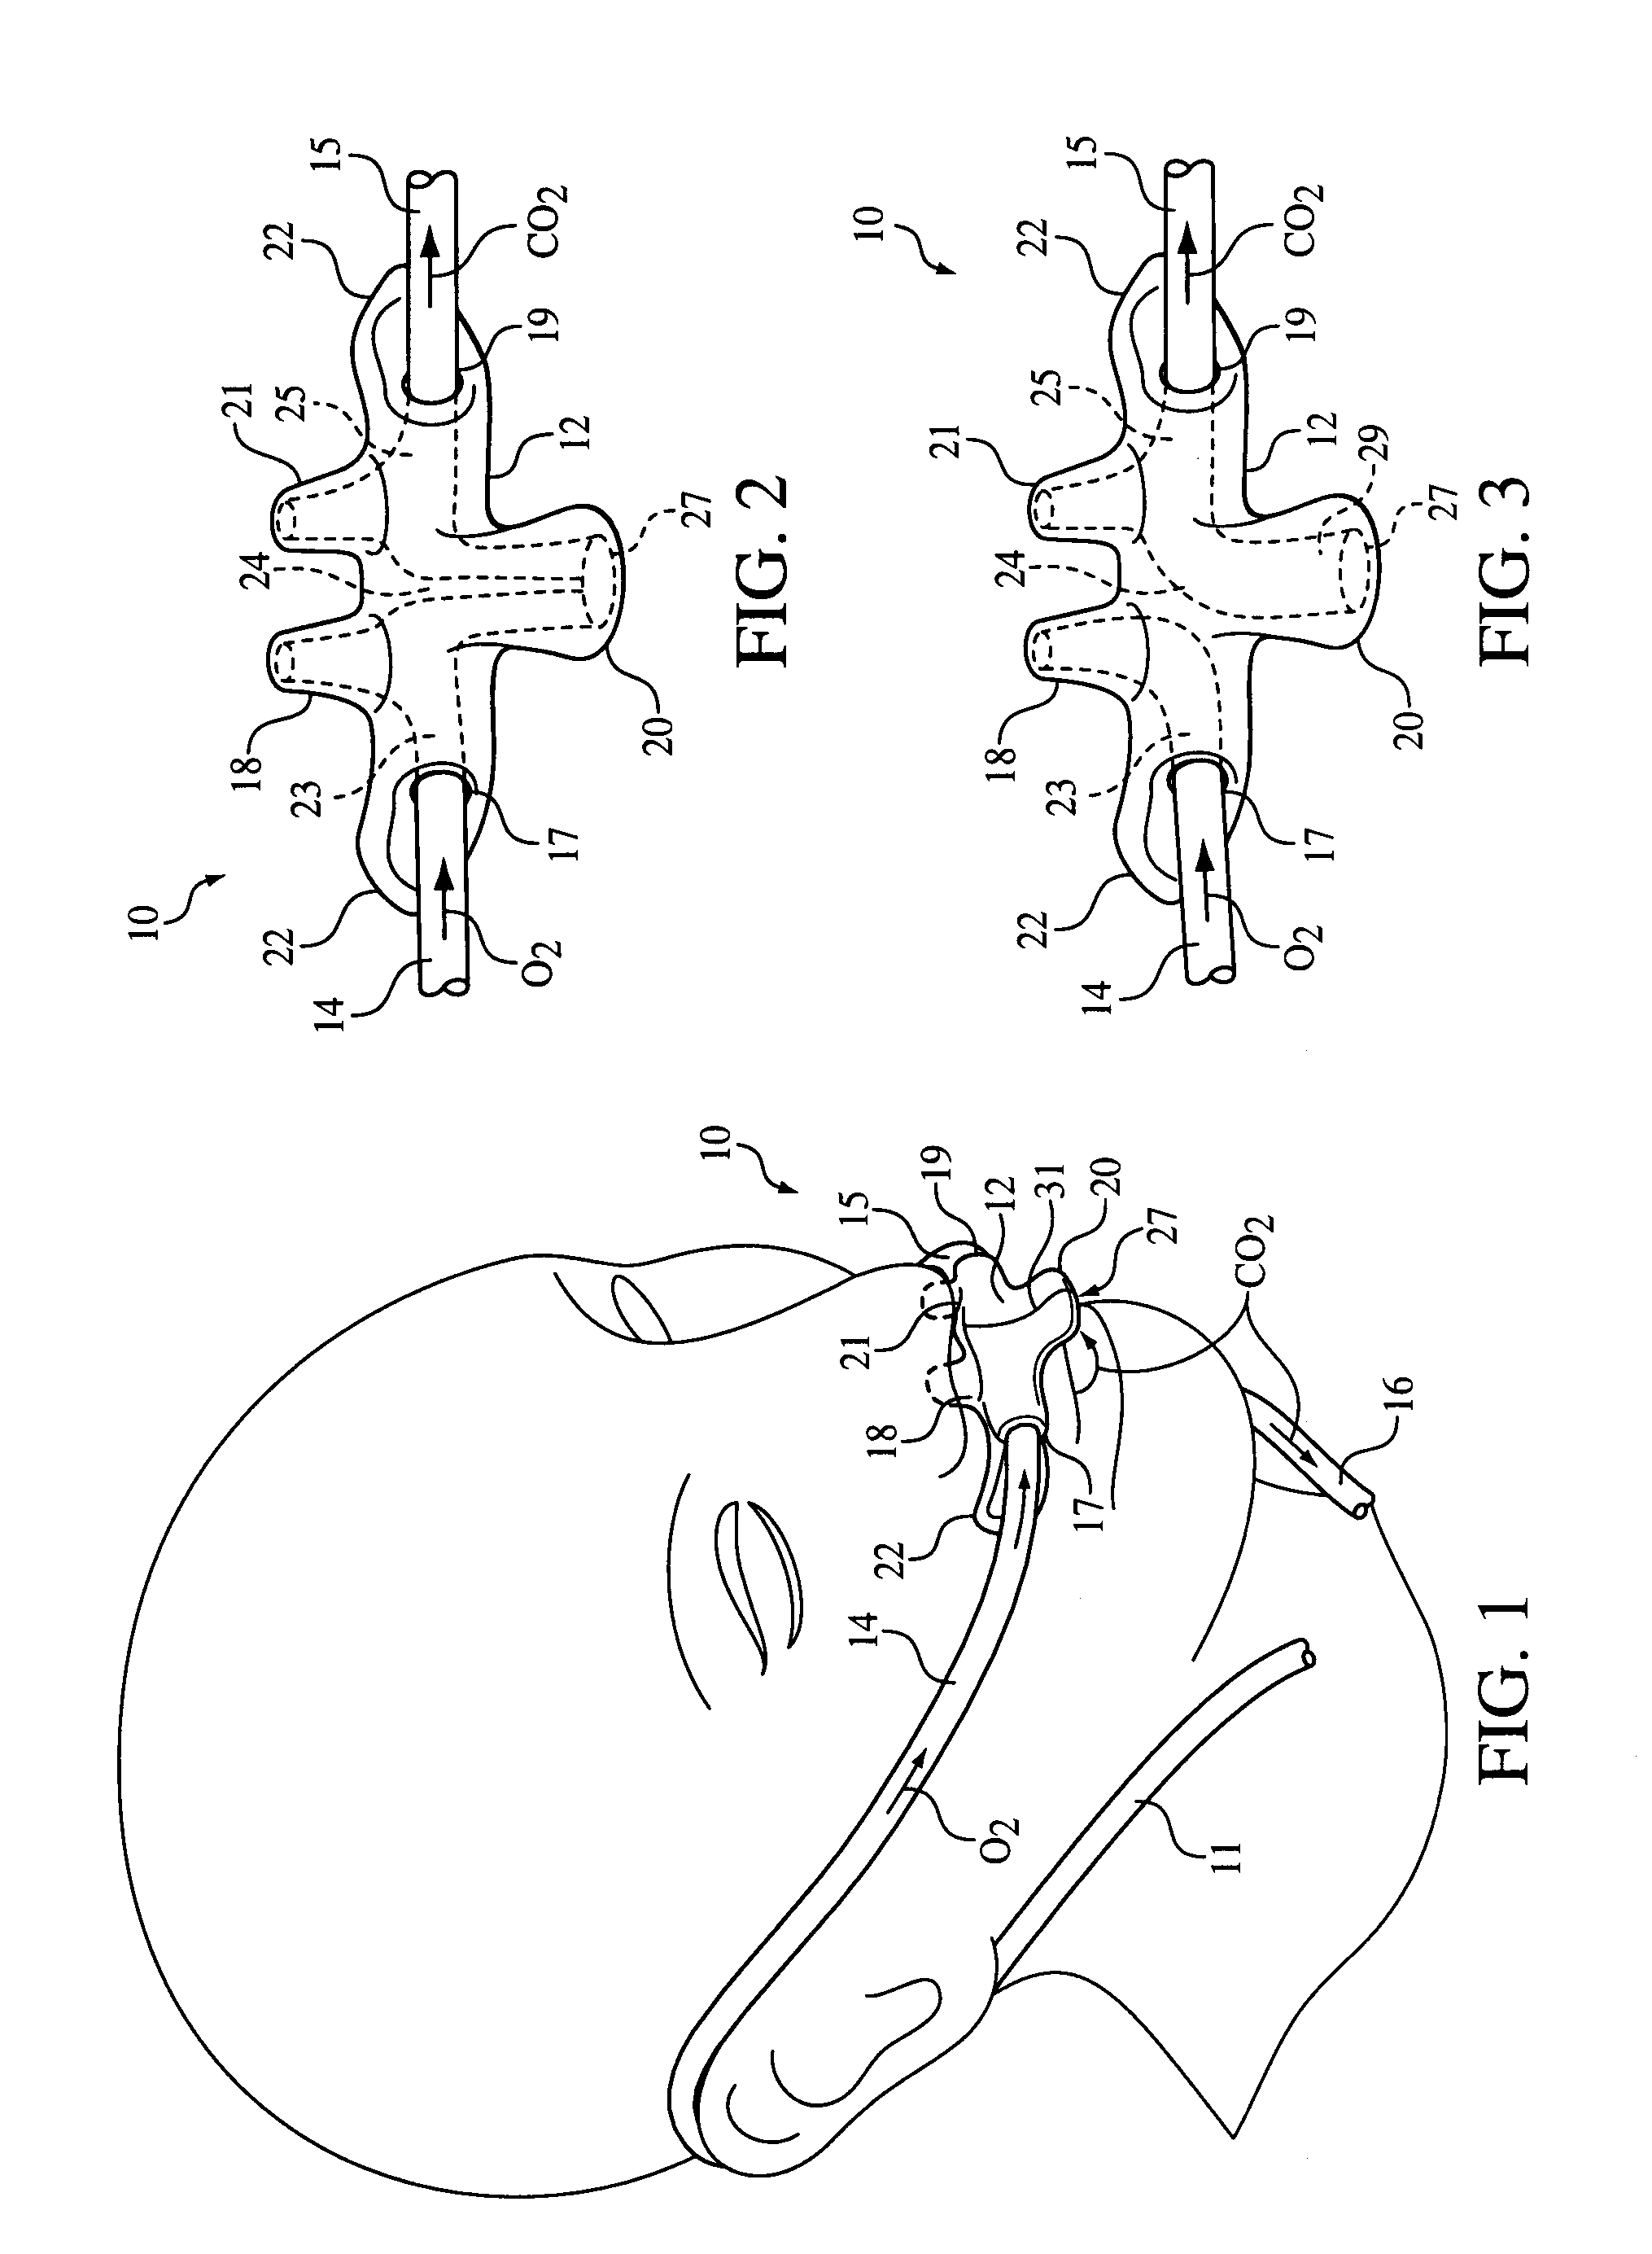 Nasal and oral patient interface